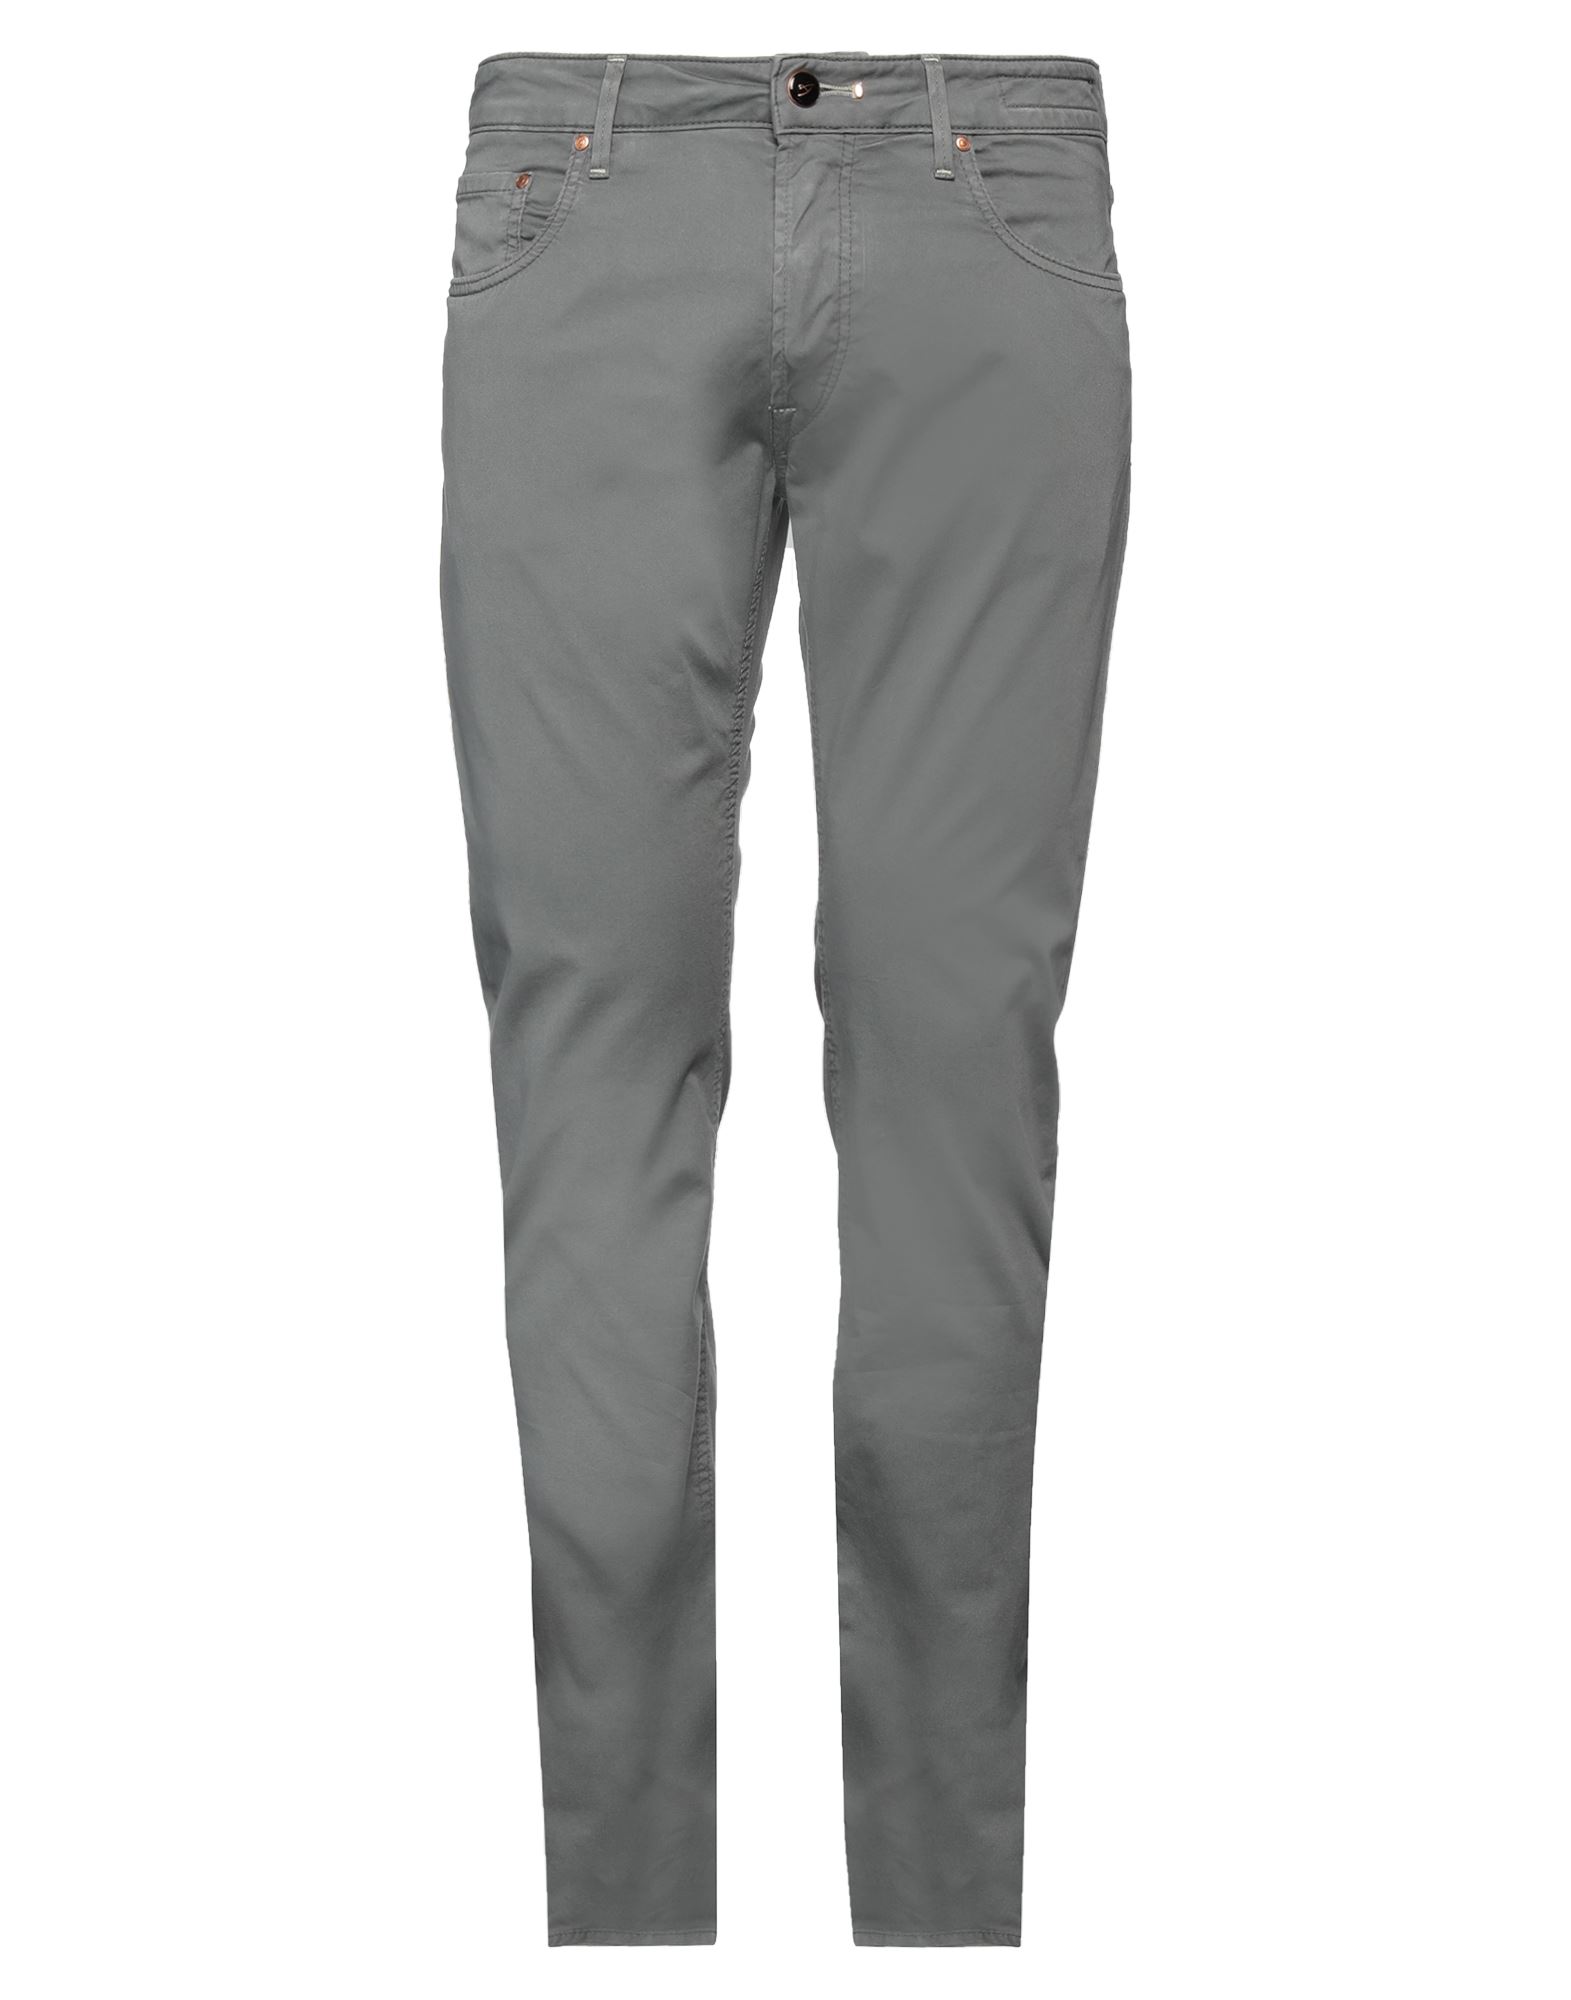 HAND PICKED HAND PICKED MAN PANTS GREY SIZE 32 COTTON, ELASTANE